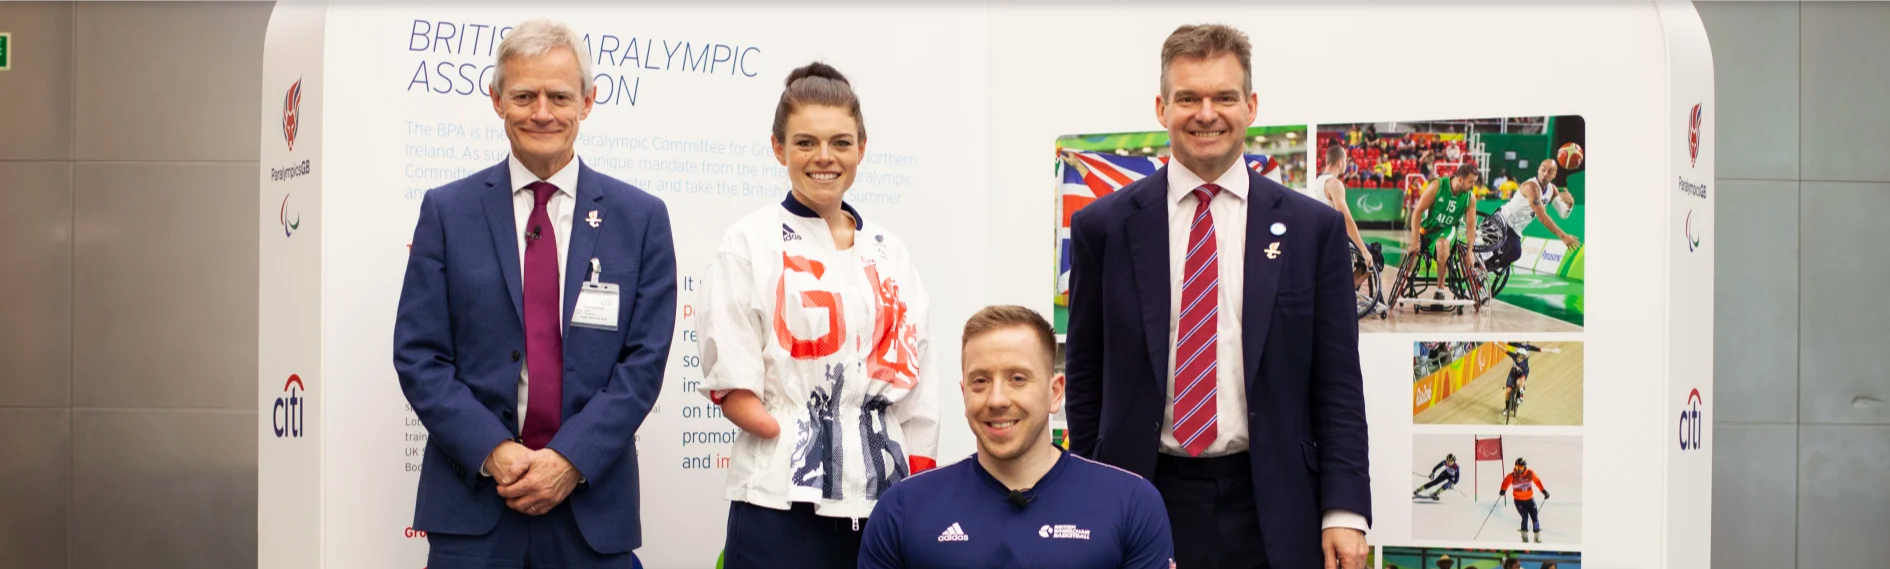 British Paralympic Association launches partnership with banking giant Citi 